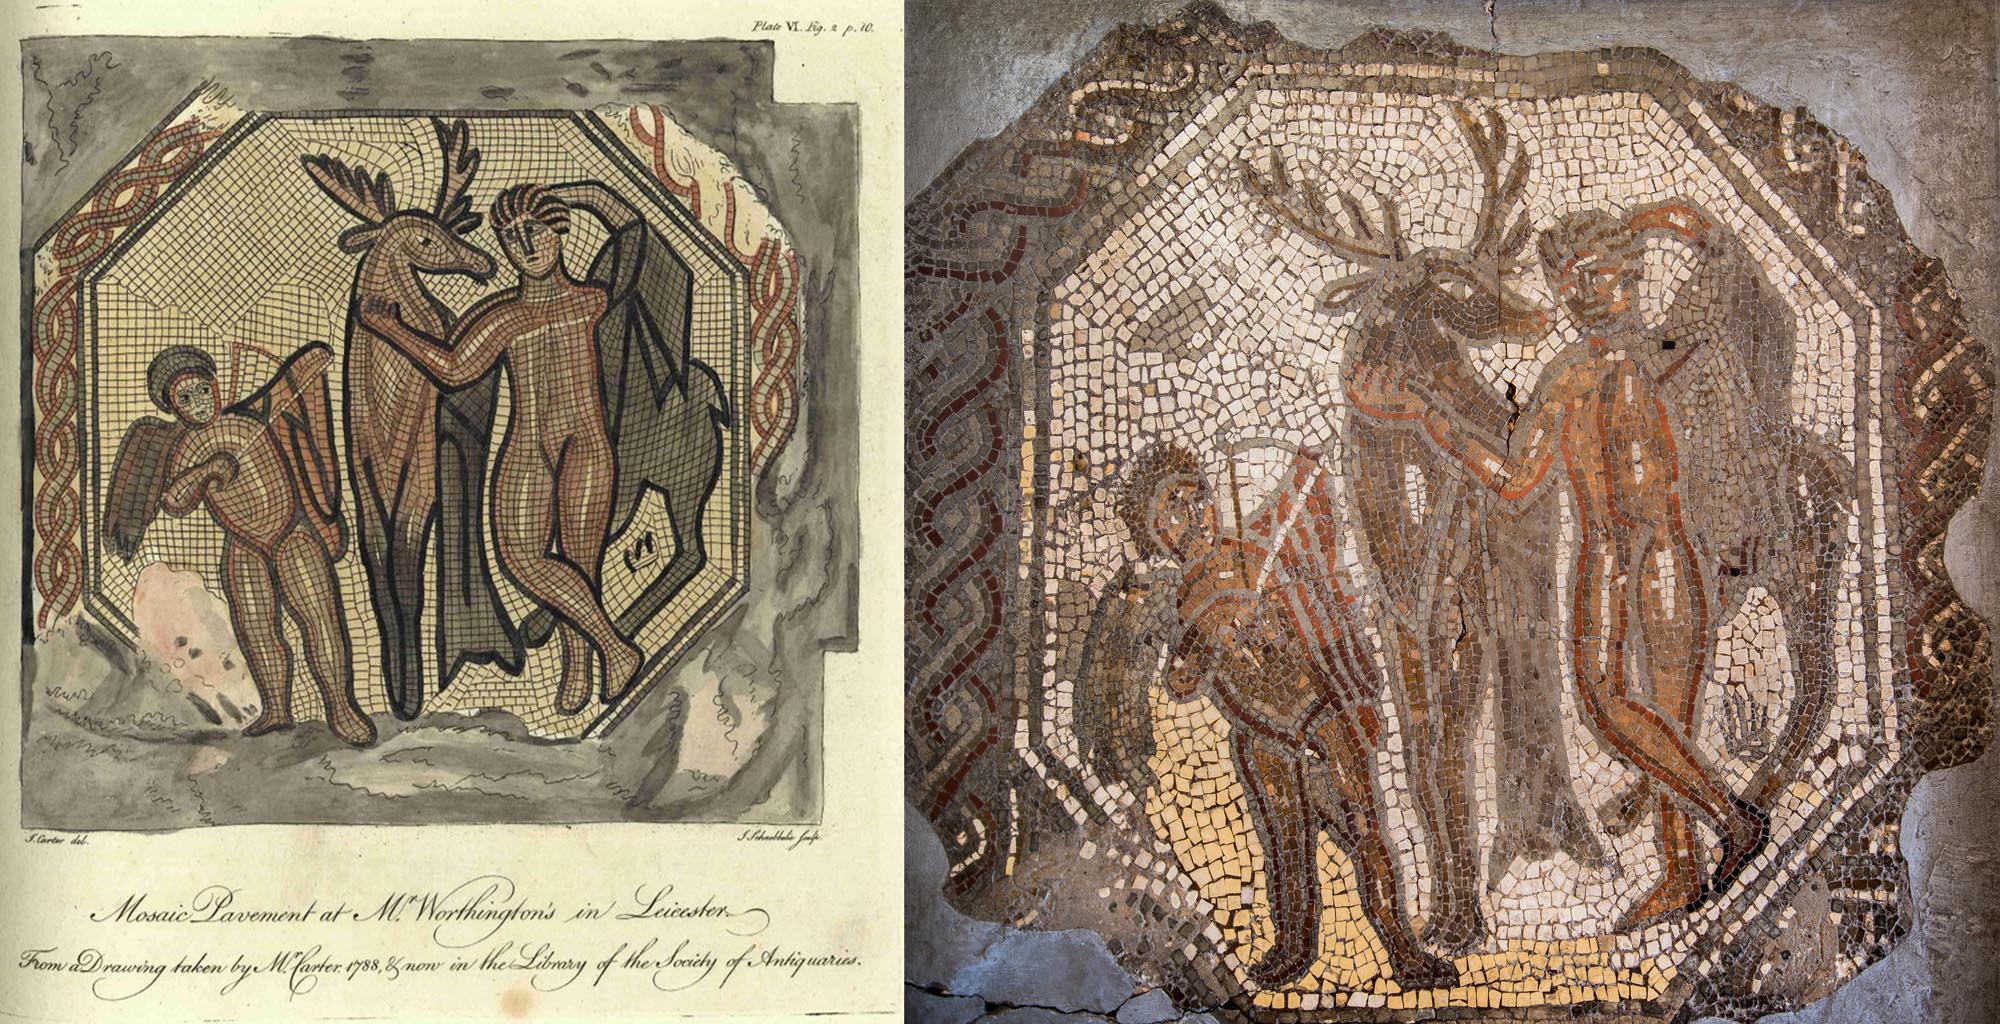 Left, An early drawing of the Cyparissus mosaic by S. Carter in 1788. Right, The Cyparissus mosaic, found on Highcross Street in Leicester in c.1675. The mosaic is one of the earliest recorded mosaics in Britain -